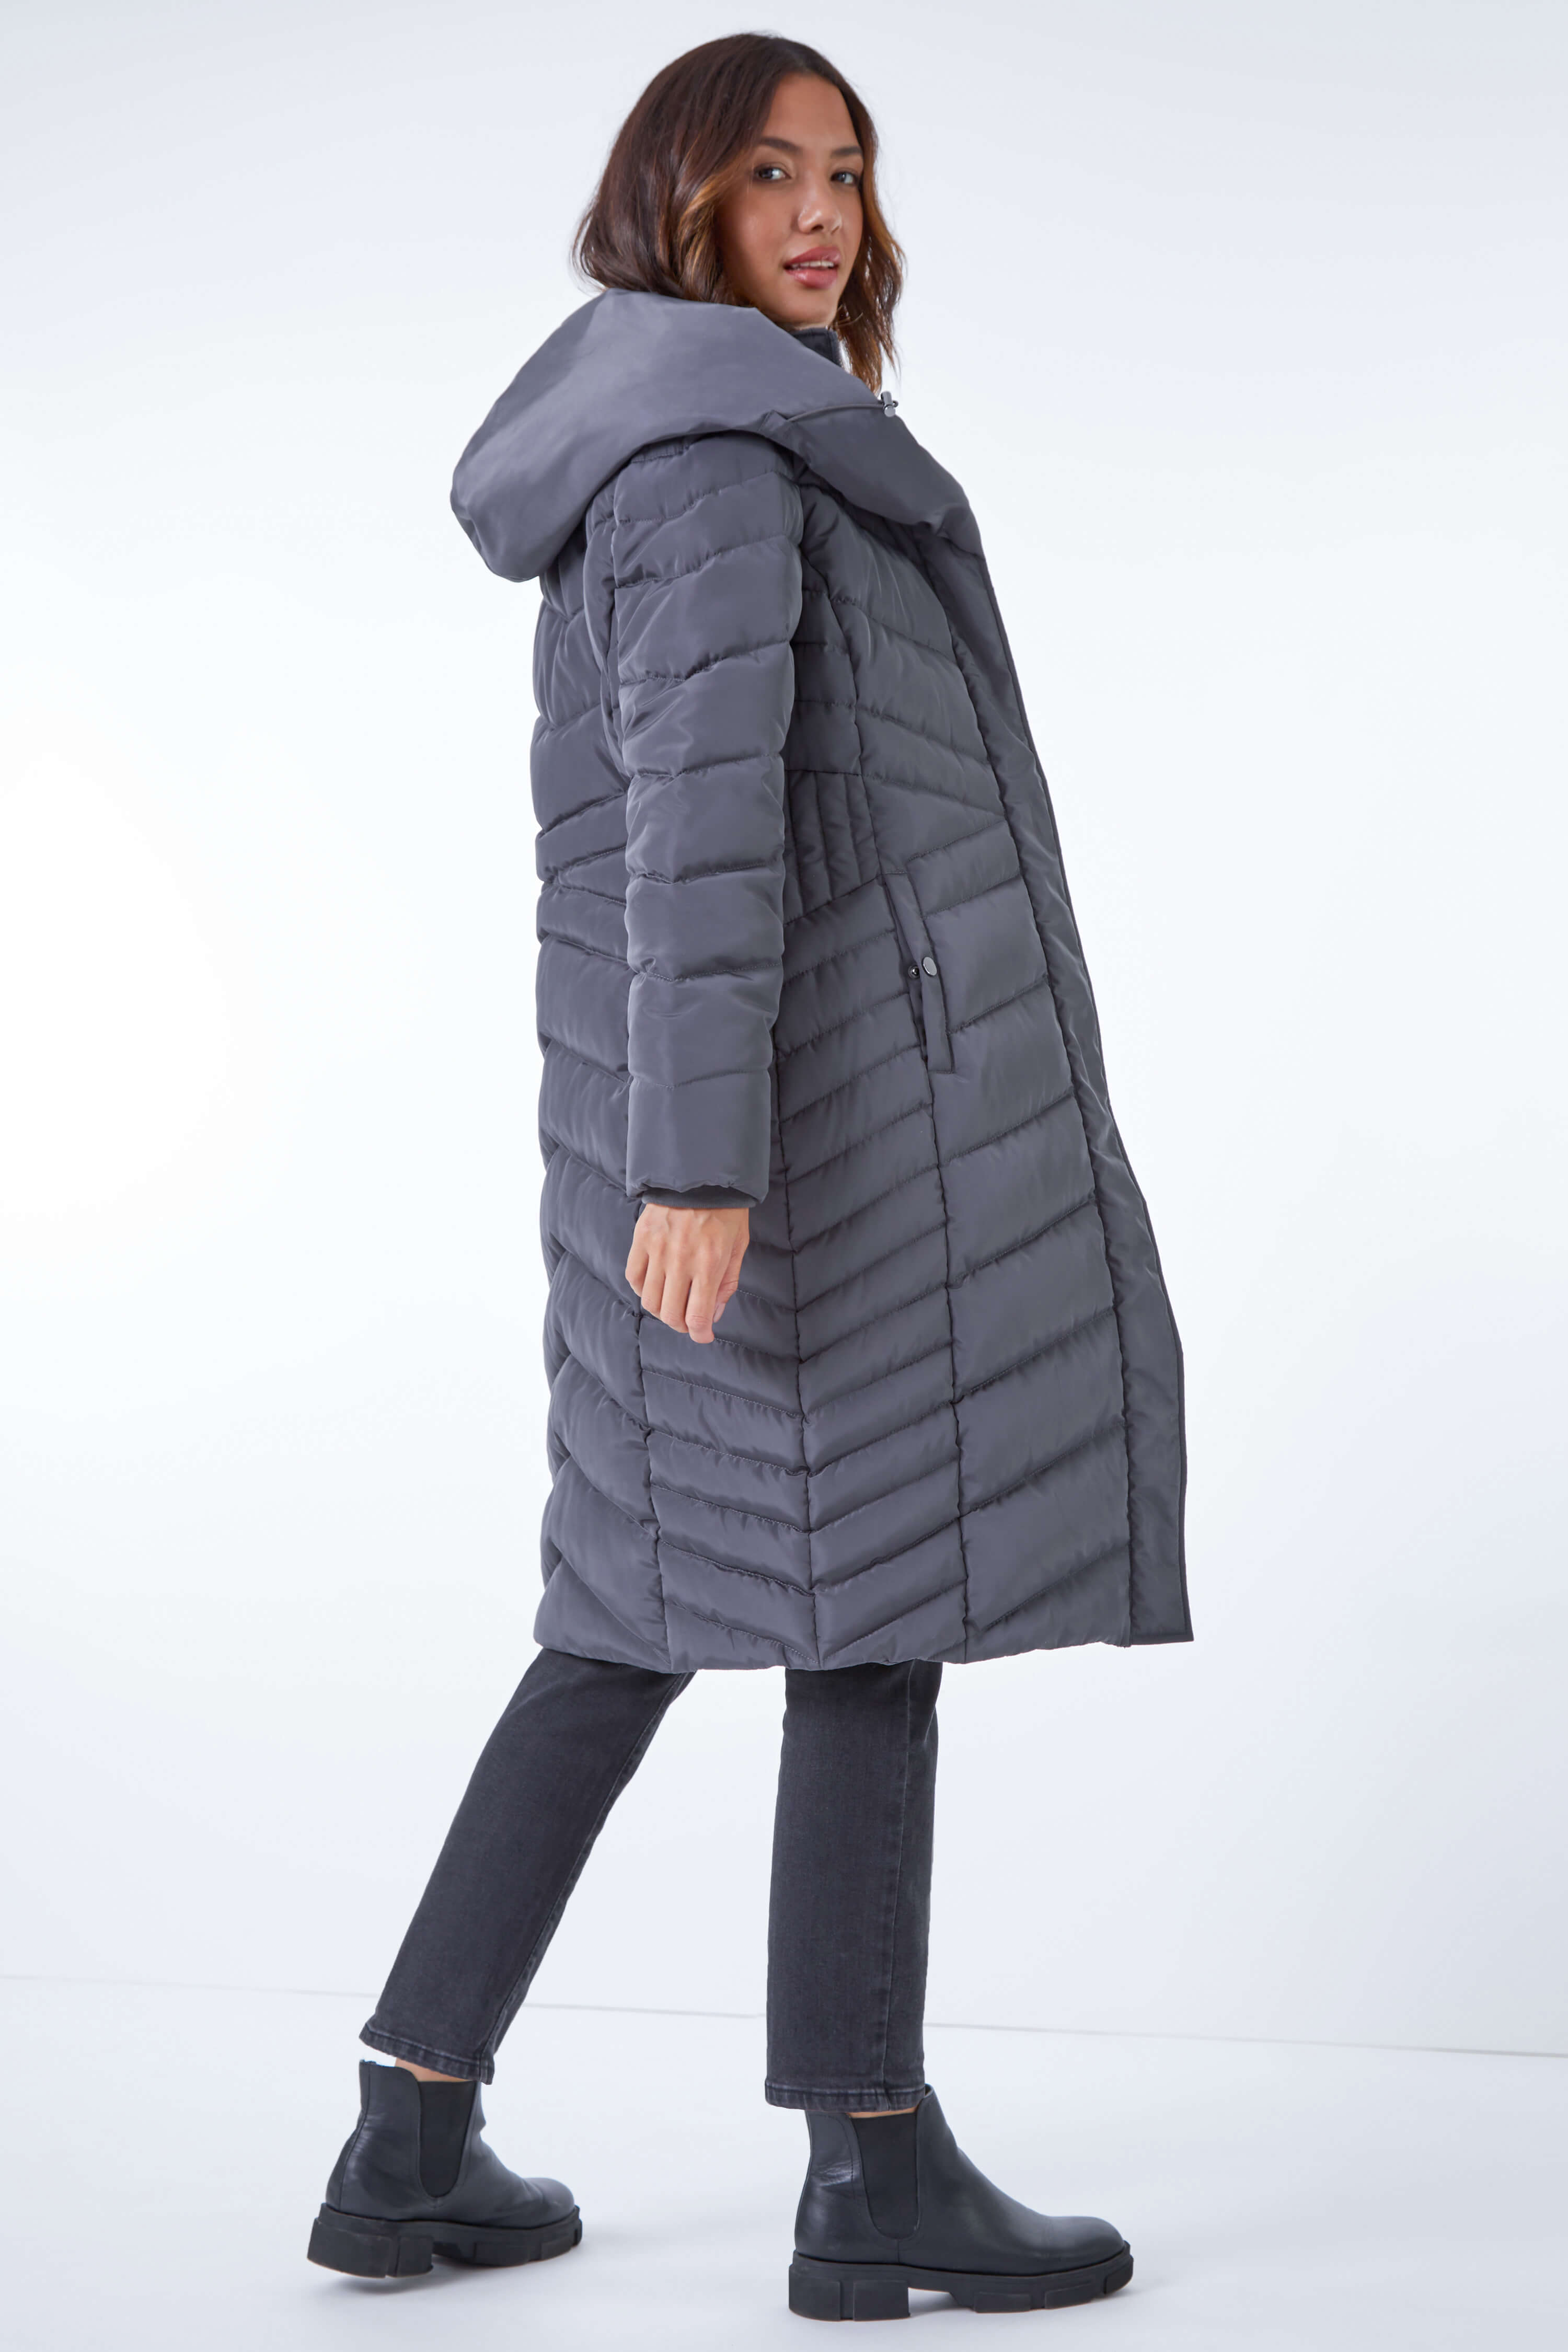 Charcoal Hooded Quilted Coat, Image 3 of 5